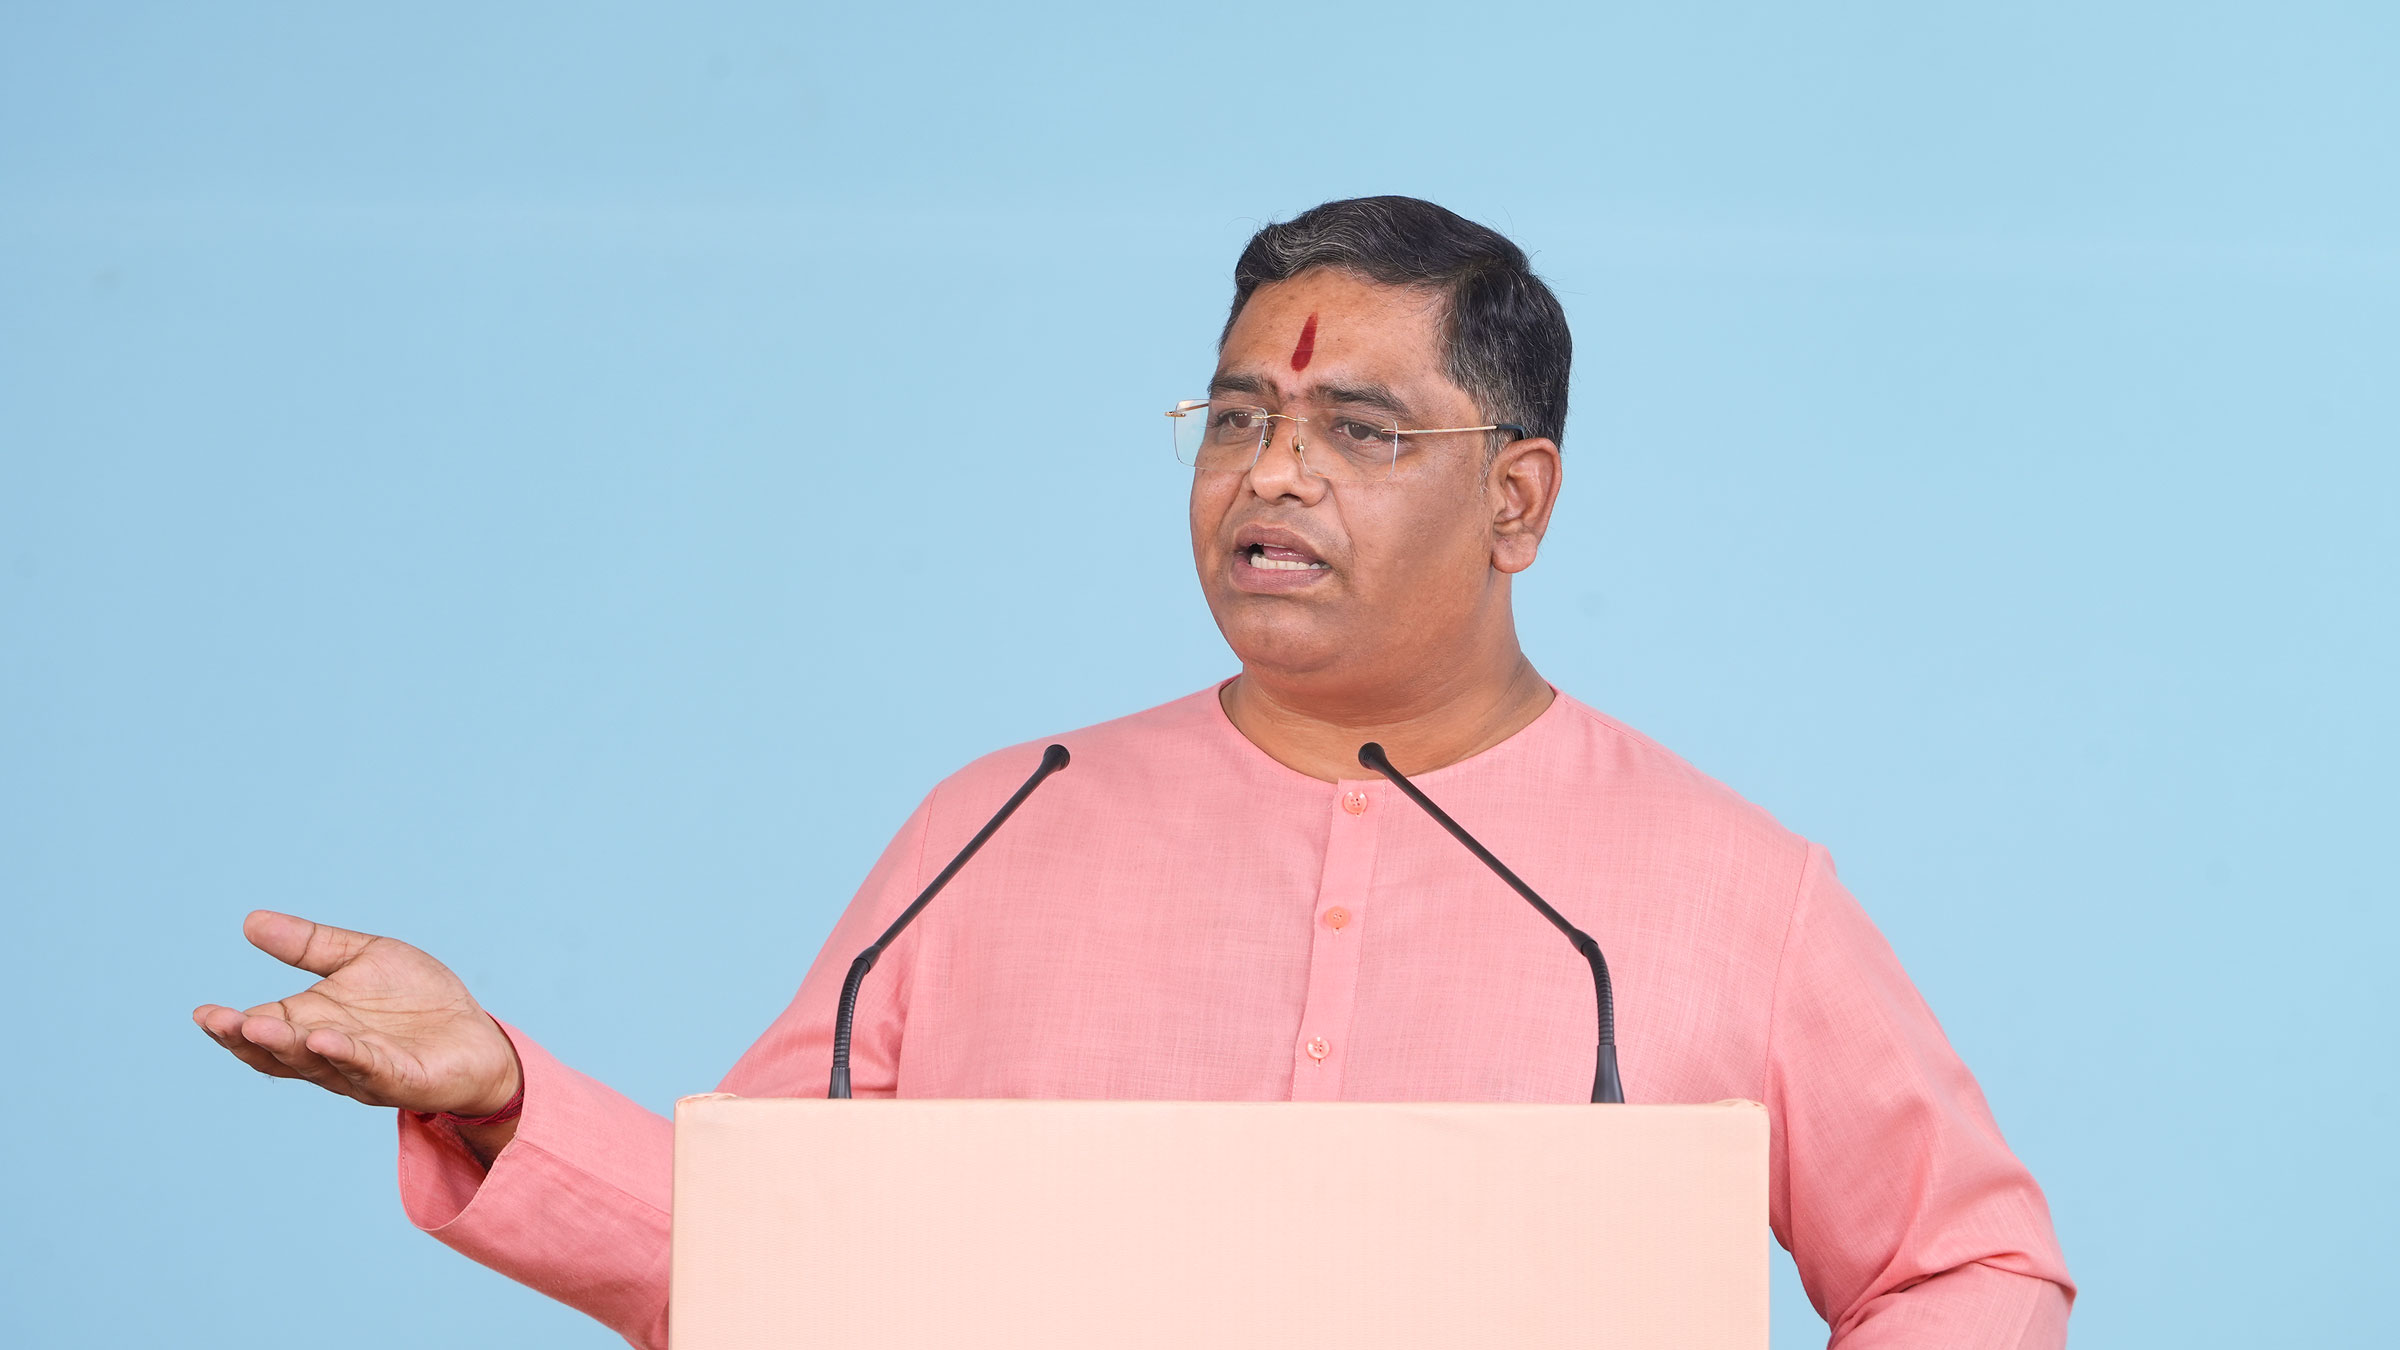 ‘Breaking India Forces’ is hatching a conspiracy to turn the youth against India. - Mr Ramesh Shinde (National Spokesperson, Hindu Janajagruti Samiti)